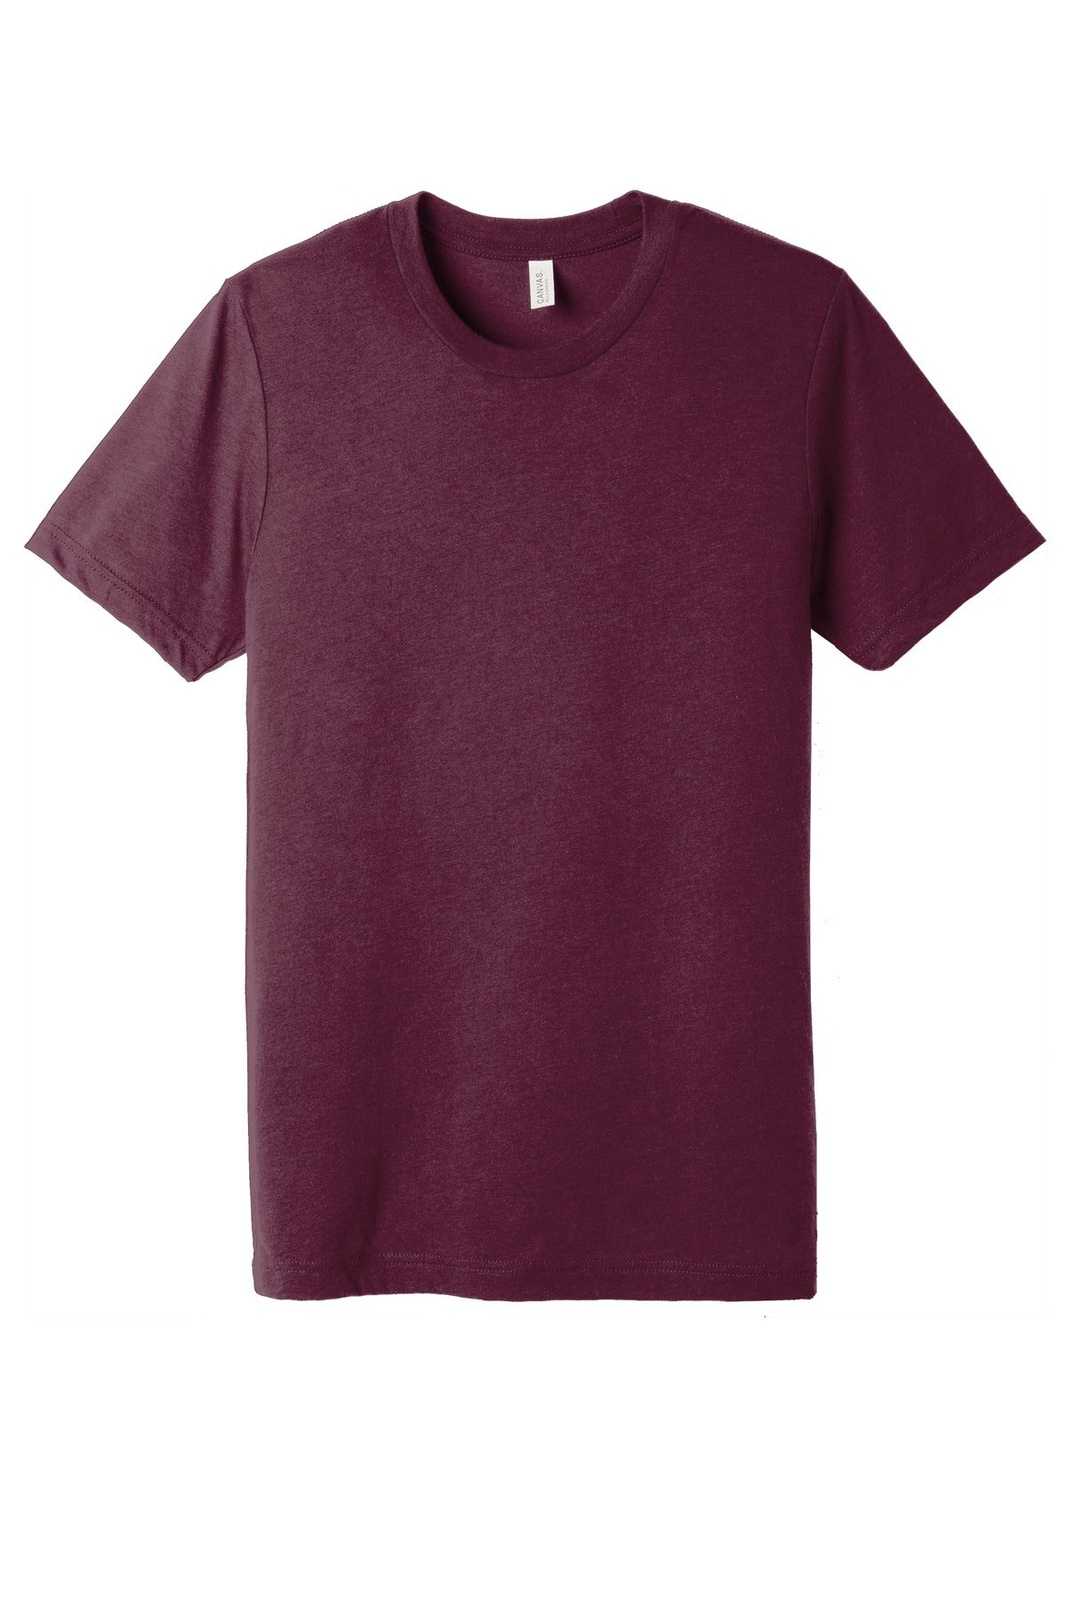 Bella + Canvas 3413 Unisex Triblend Short Sleeve Tee - Solid Maroon Triblend - HIT a Double